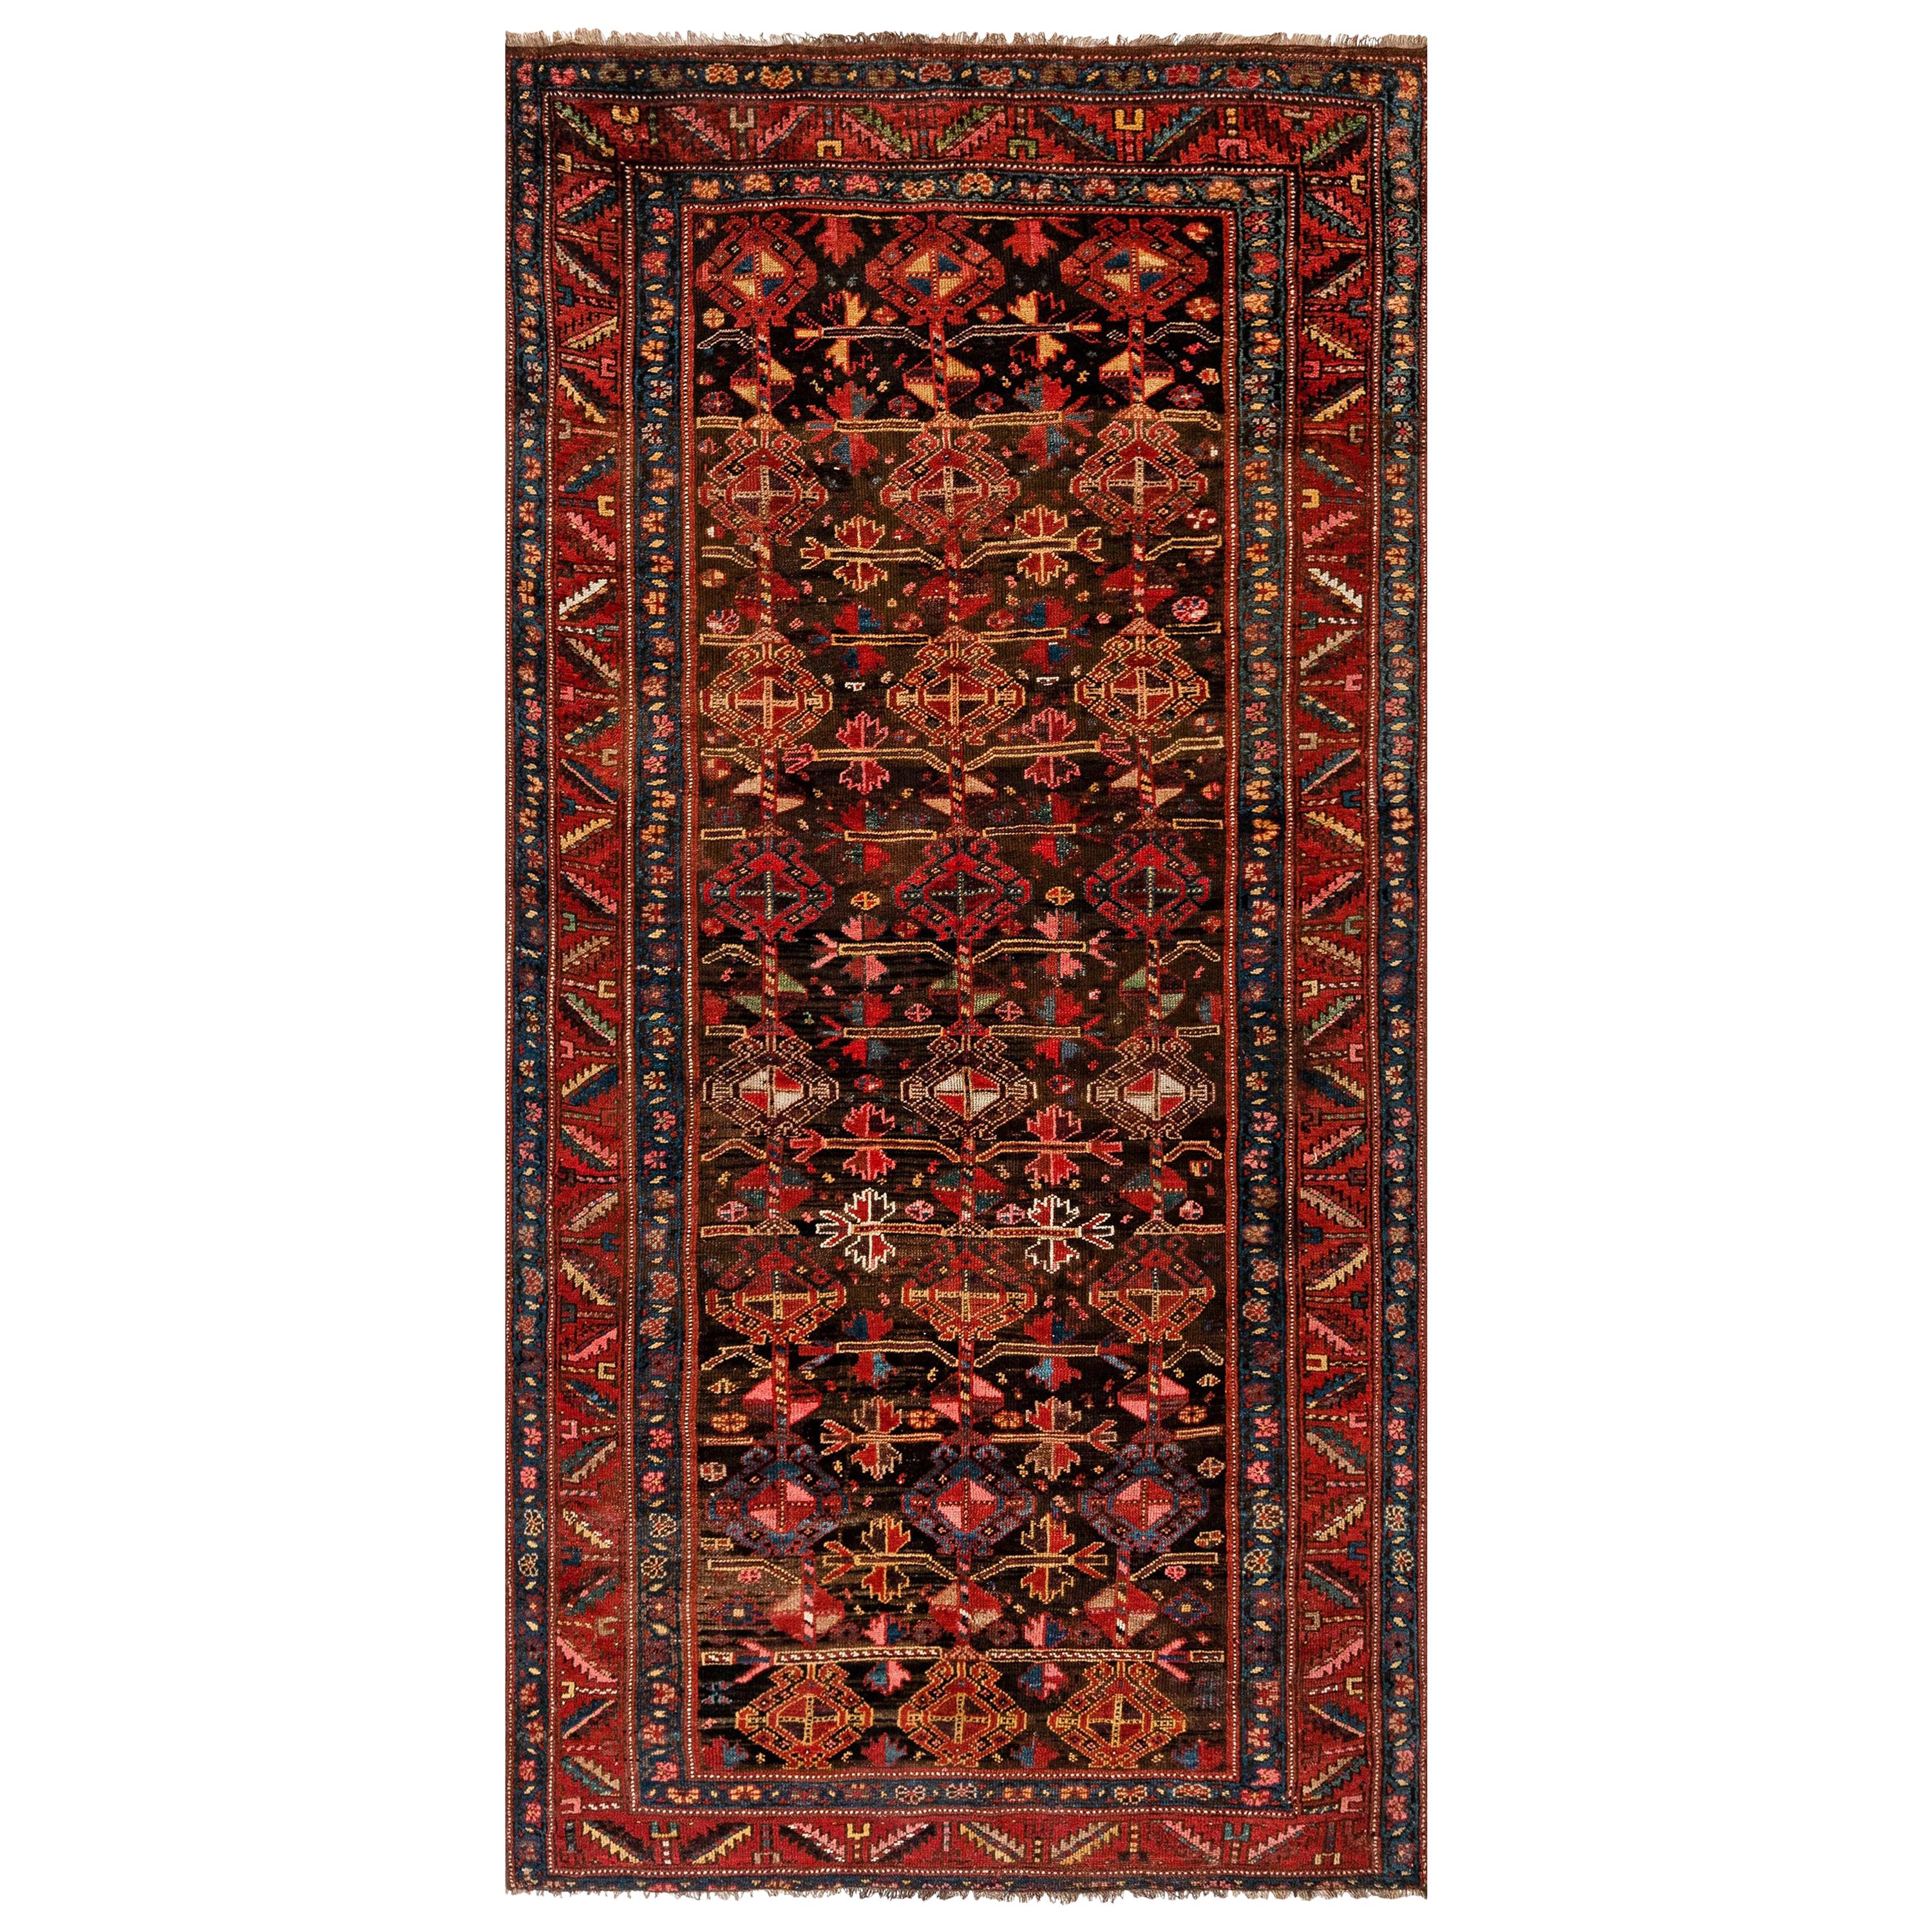 1900s Persian Malayer Geometric Handmade Wool Rug in Red, Blue, Yellow and Black